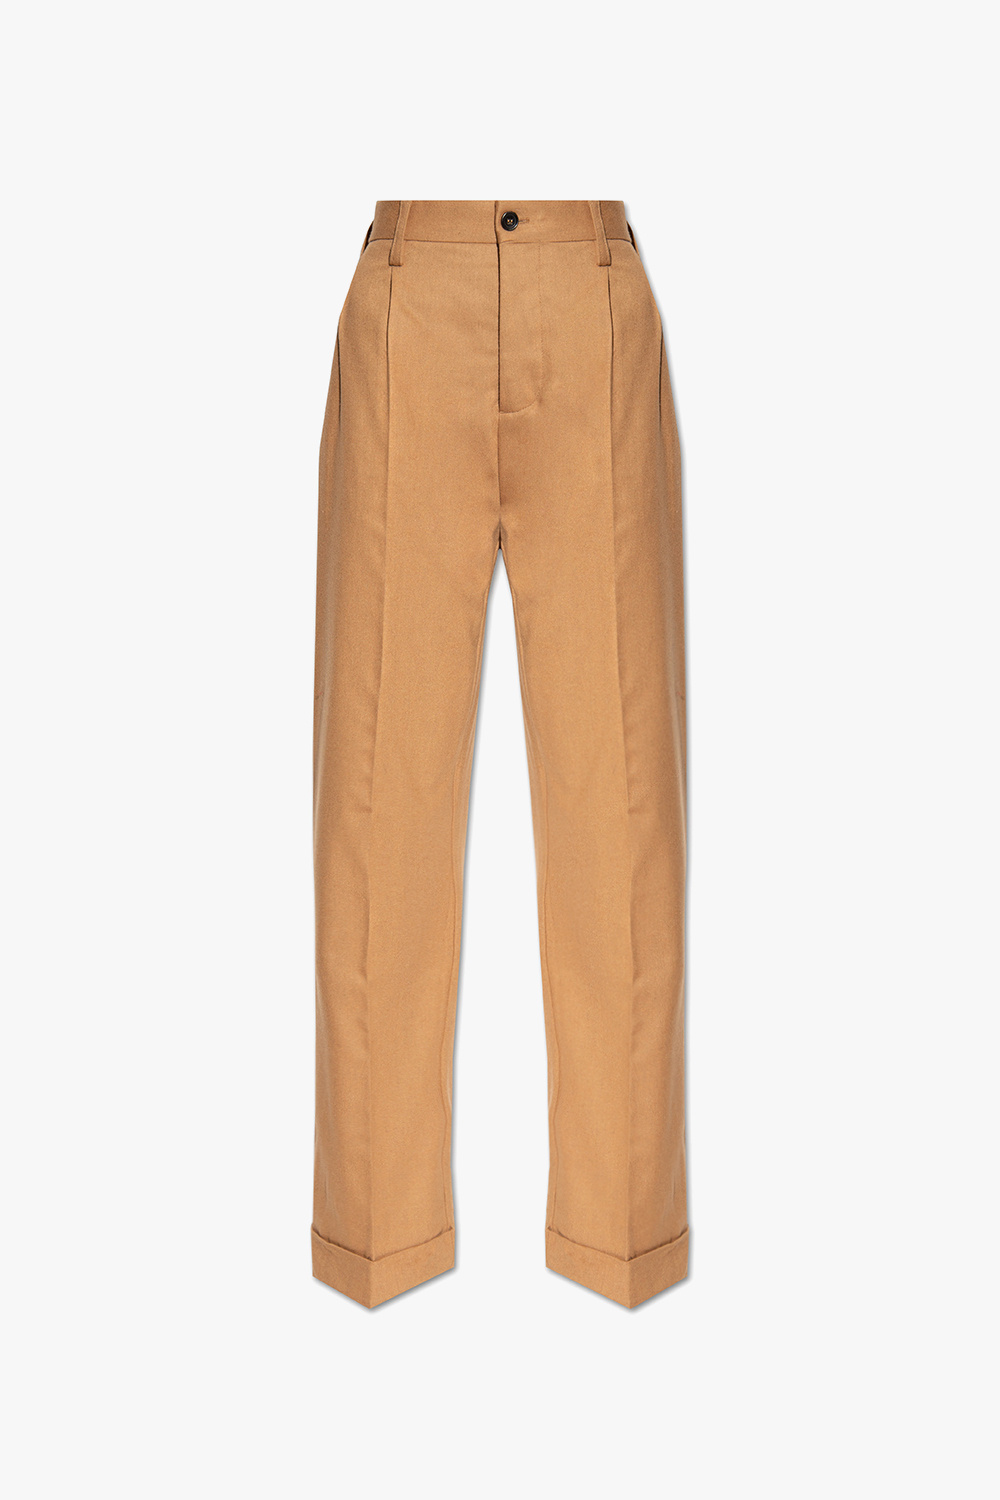 Marni Wool pleat-front for trousers